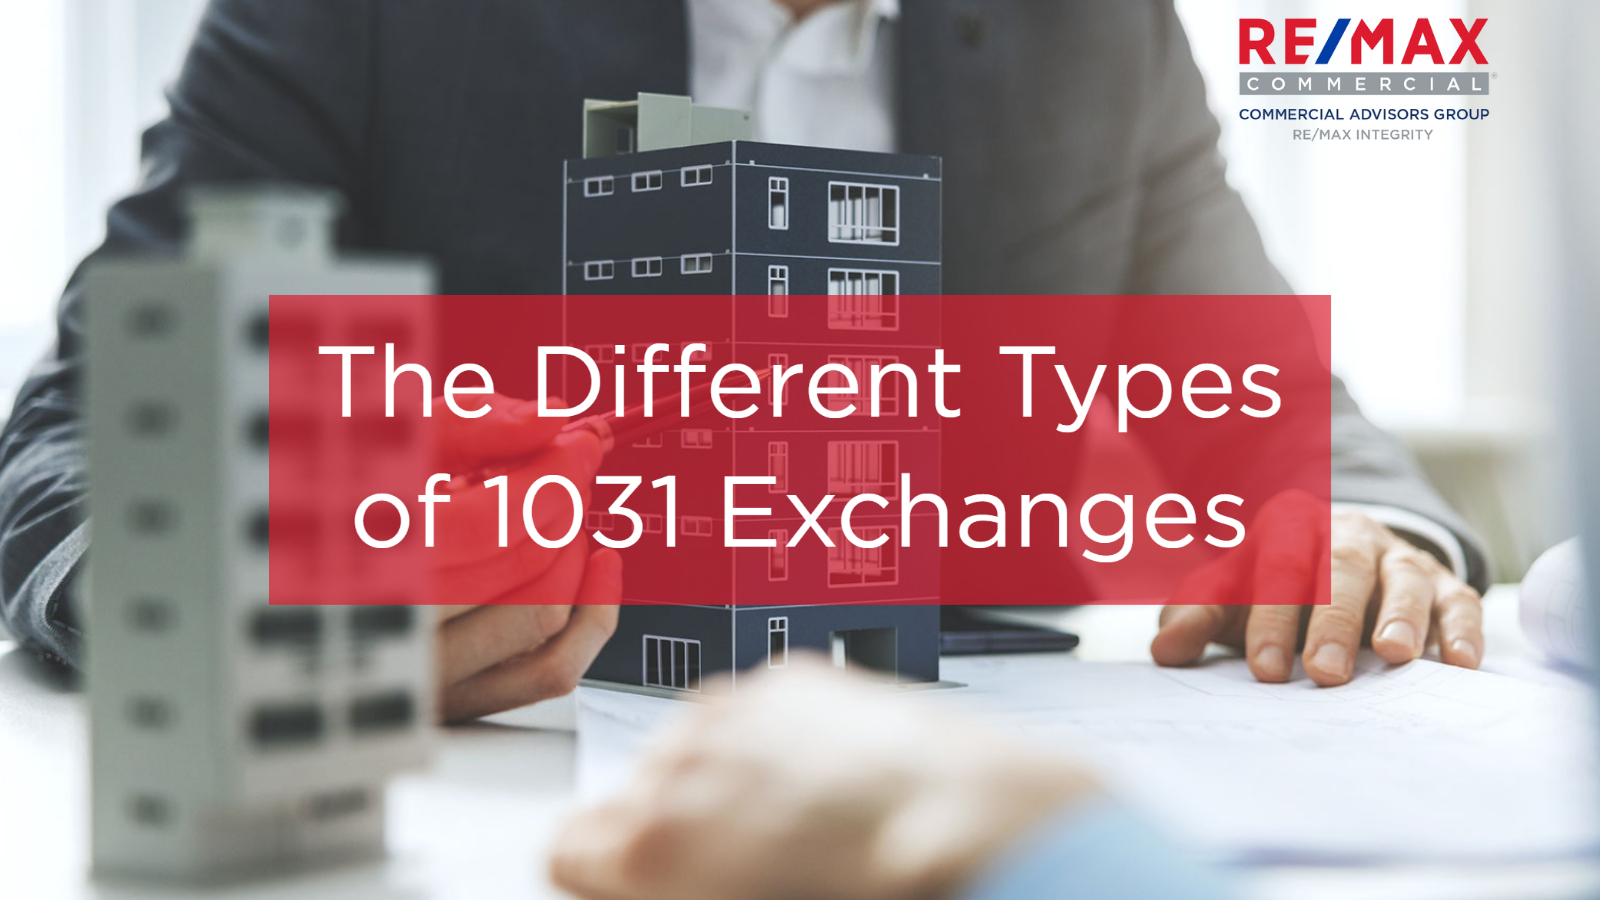 Types of 1031 Exchanges-1